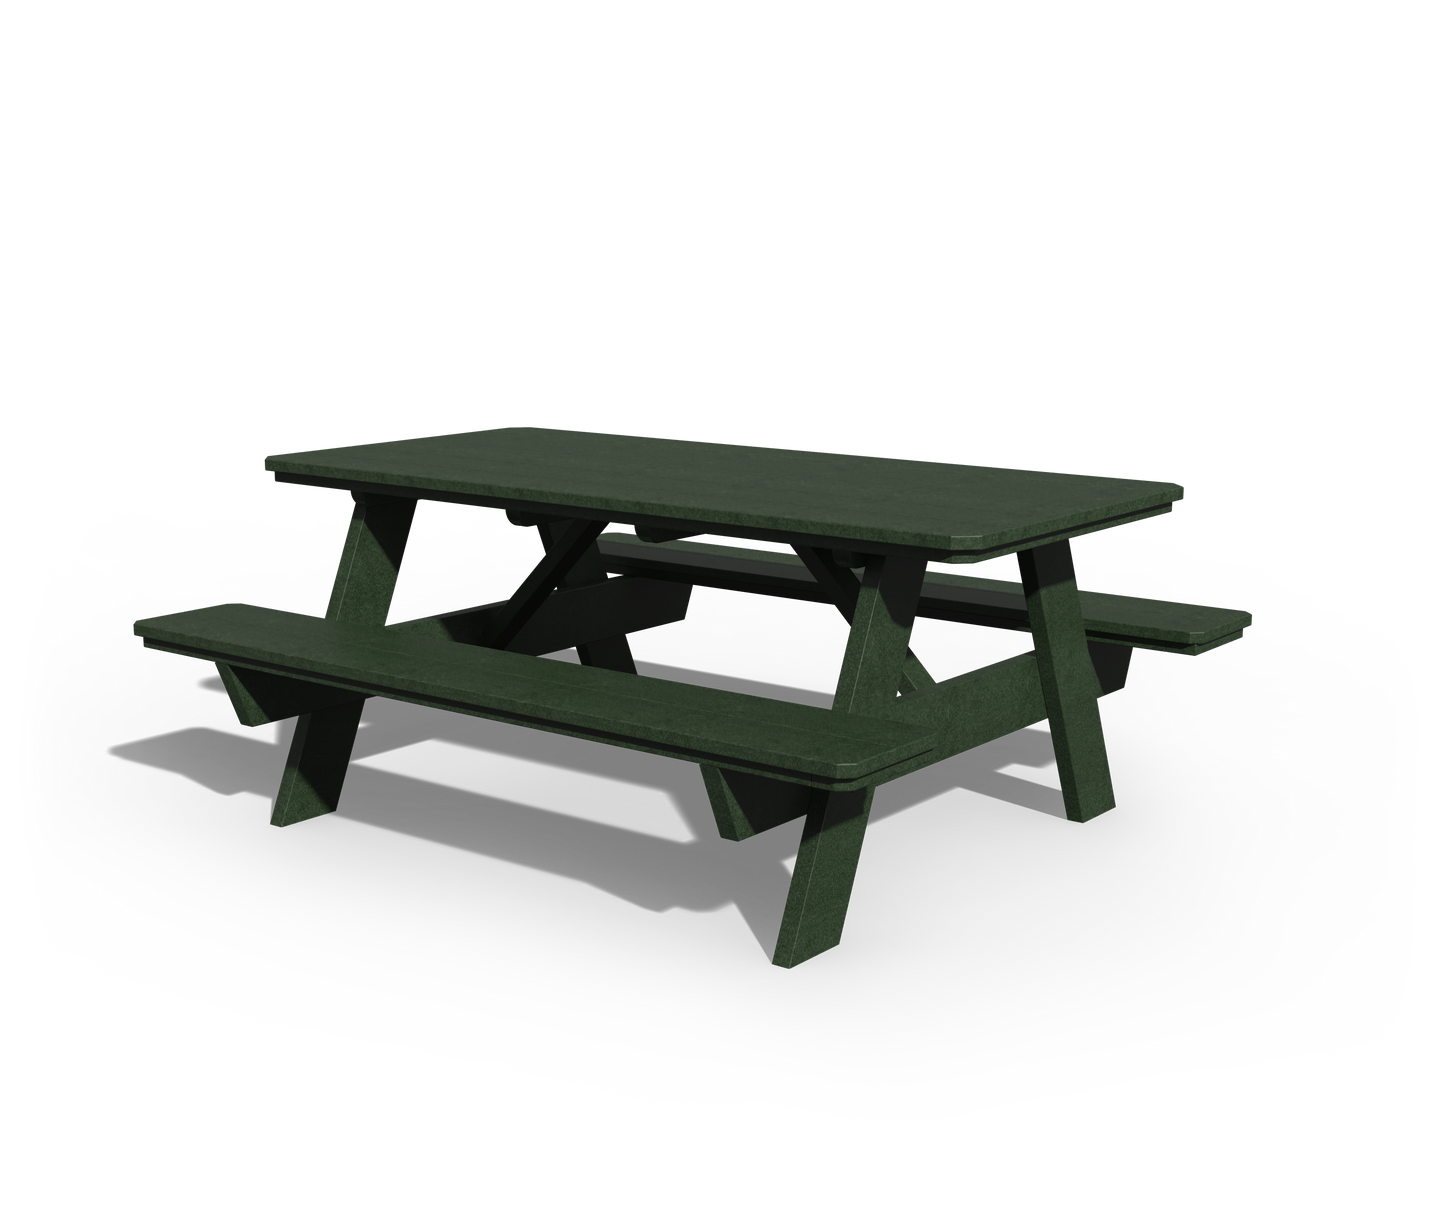 Patiova Recycled Plastic 3'x6' Picnic Table with Seats Attached - LEAD TIME TO SHIP 3 WEEKS